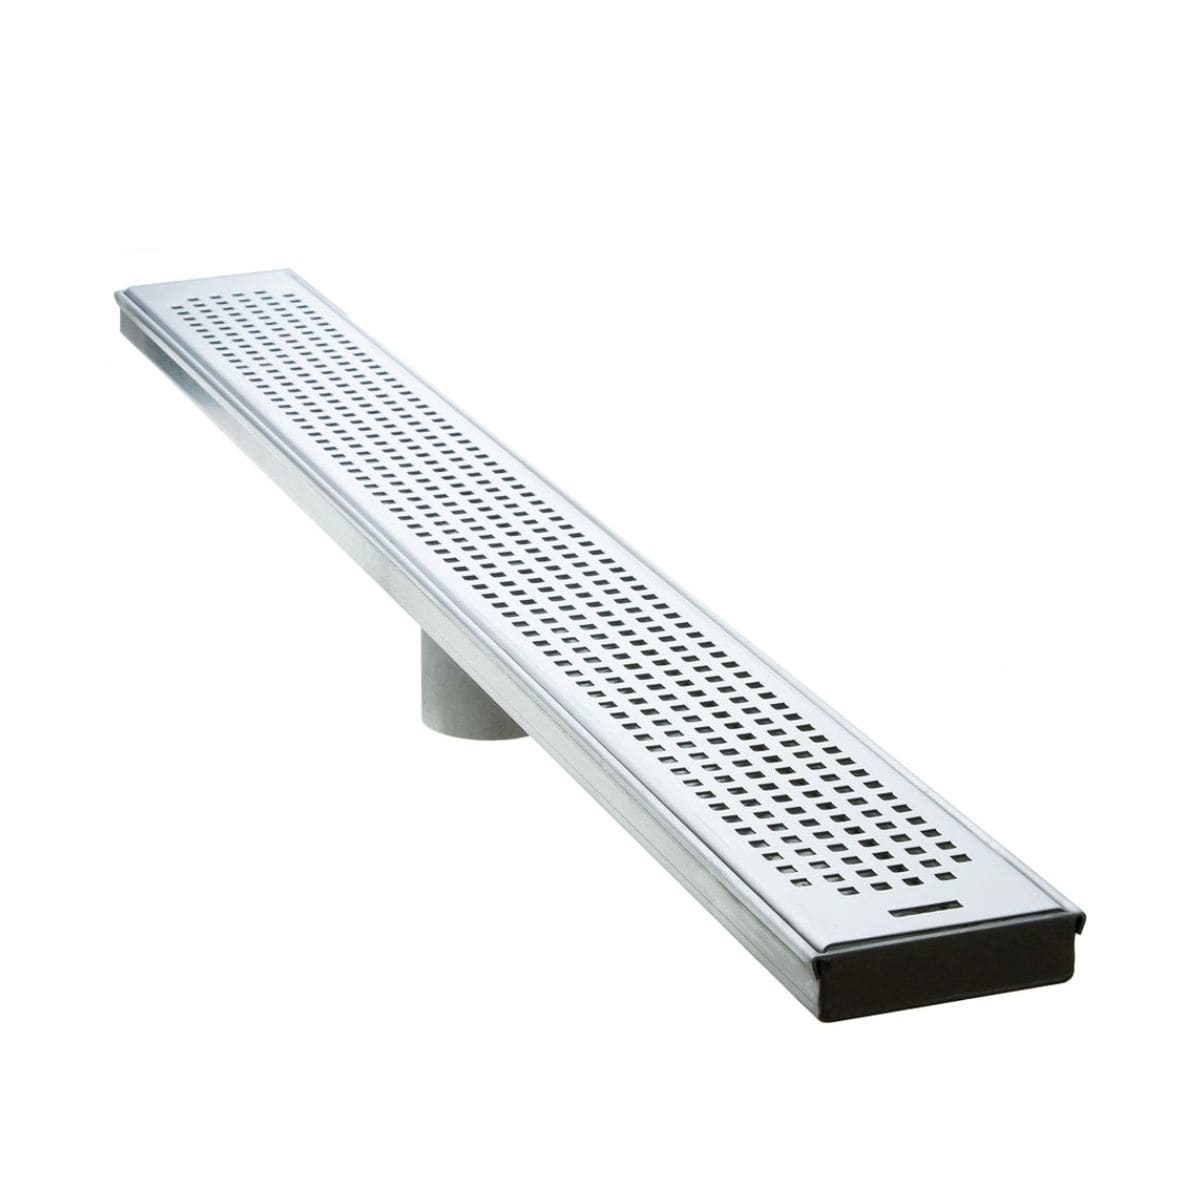 Linear shower drain from Luxe, 2018-09-26